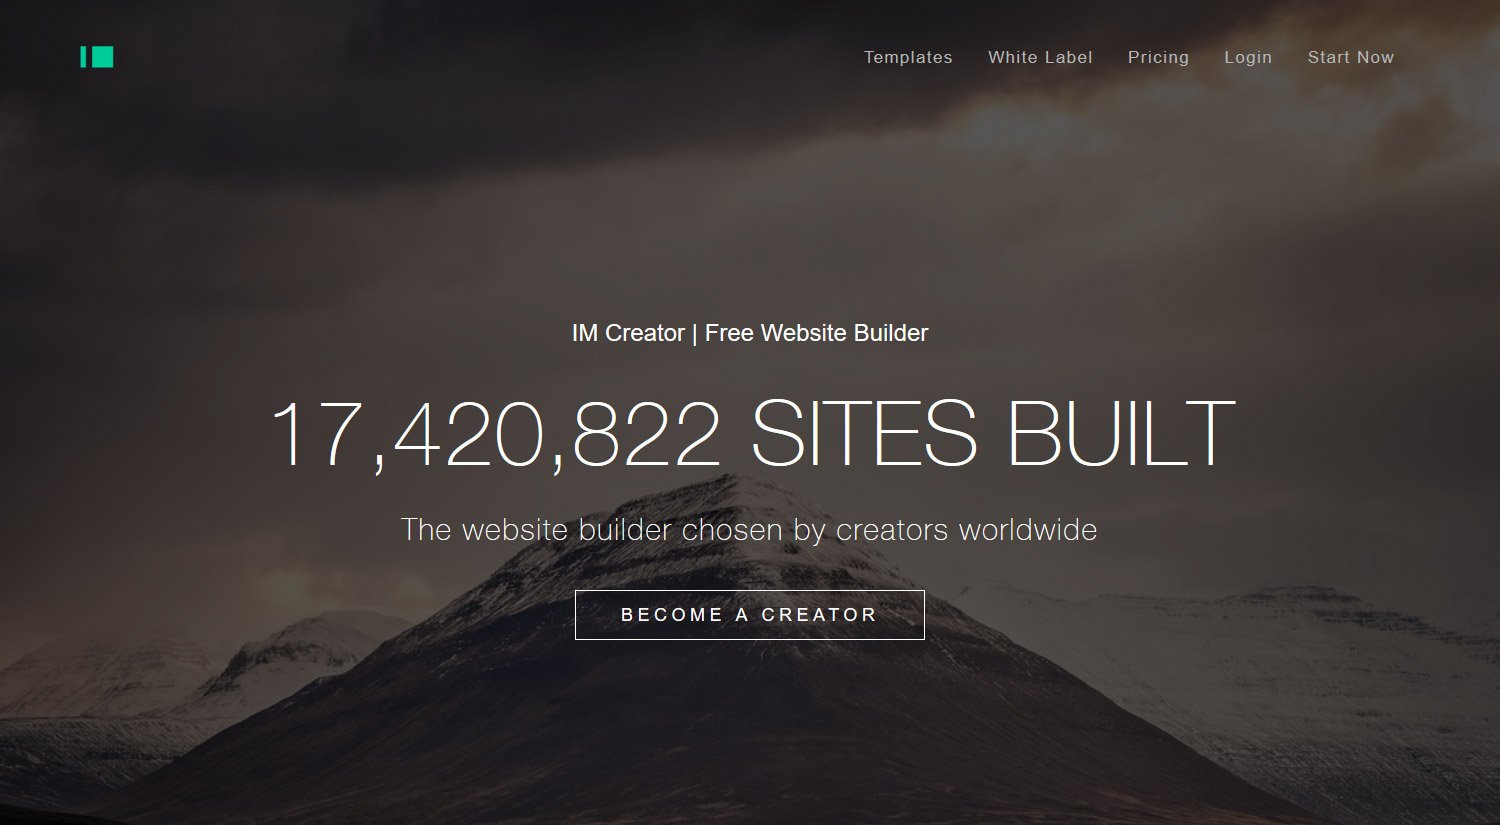 Free website hosting and first level domain name at Imcreator